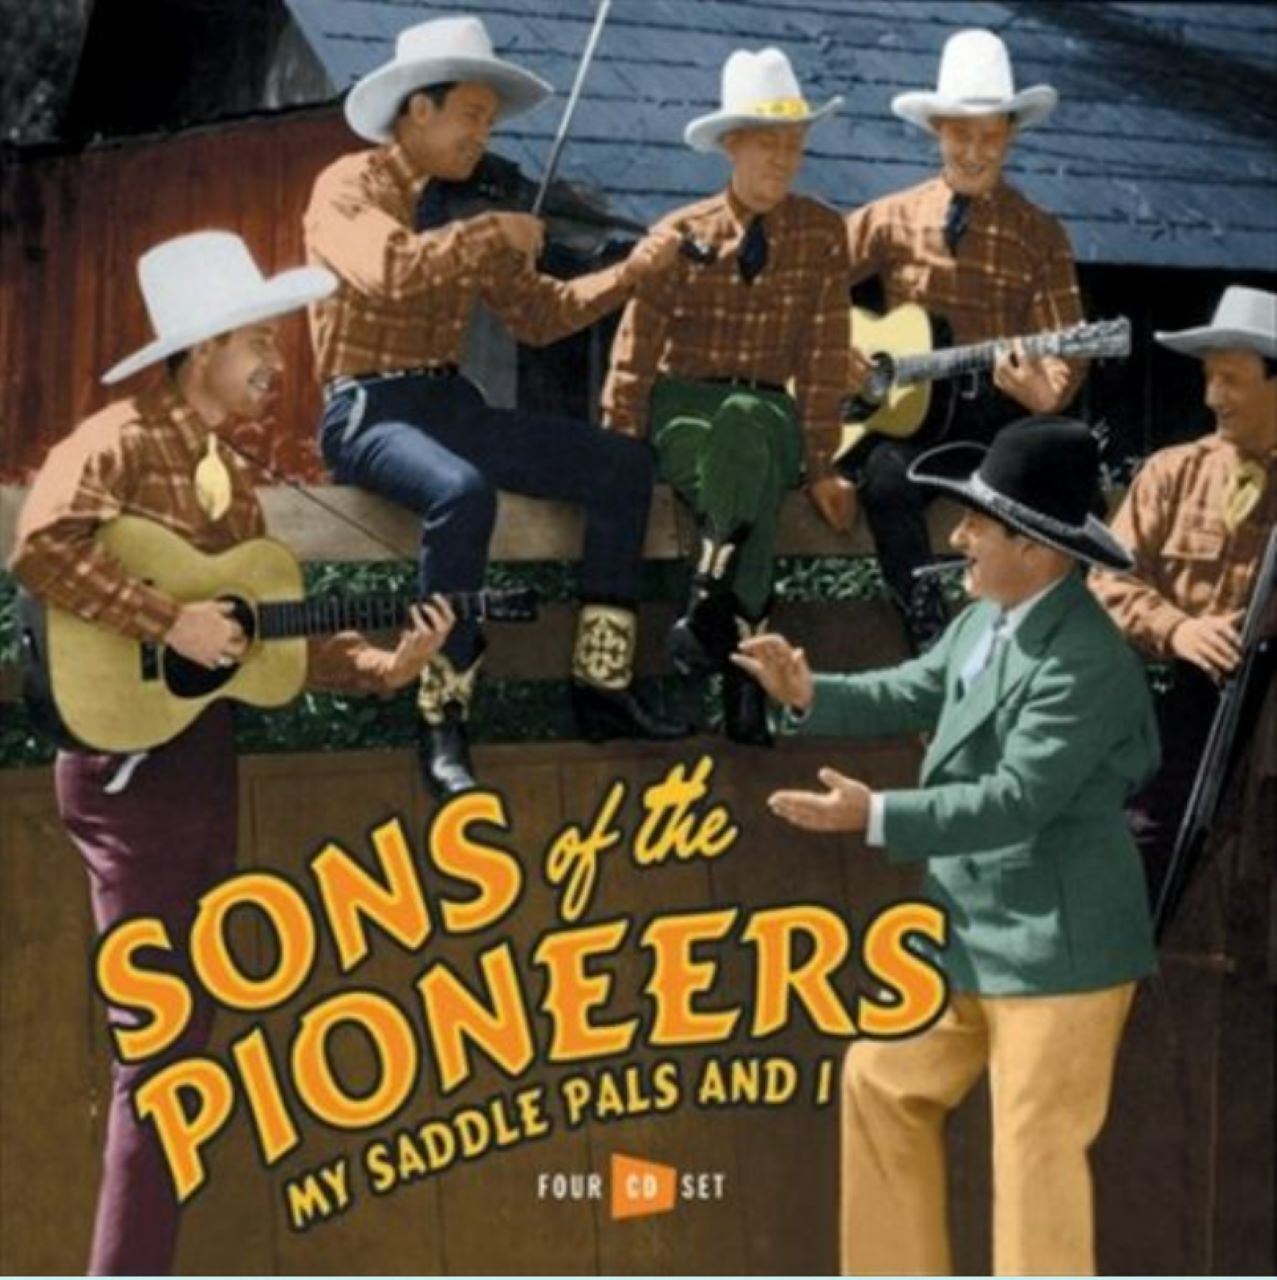 Sons Of The Pioneers - My Saddle Pals And I cover album